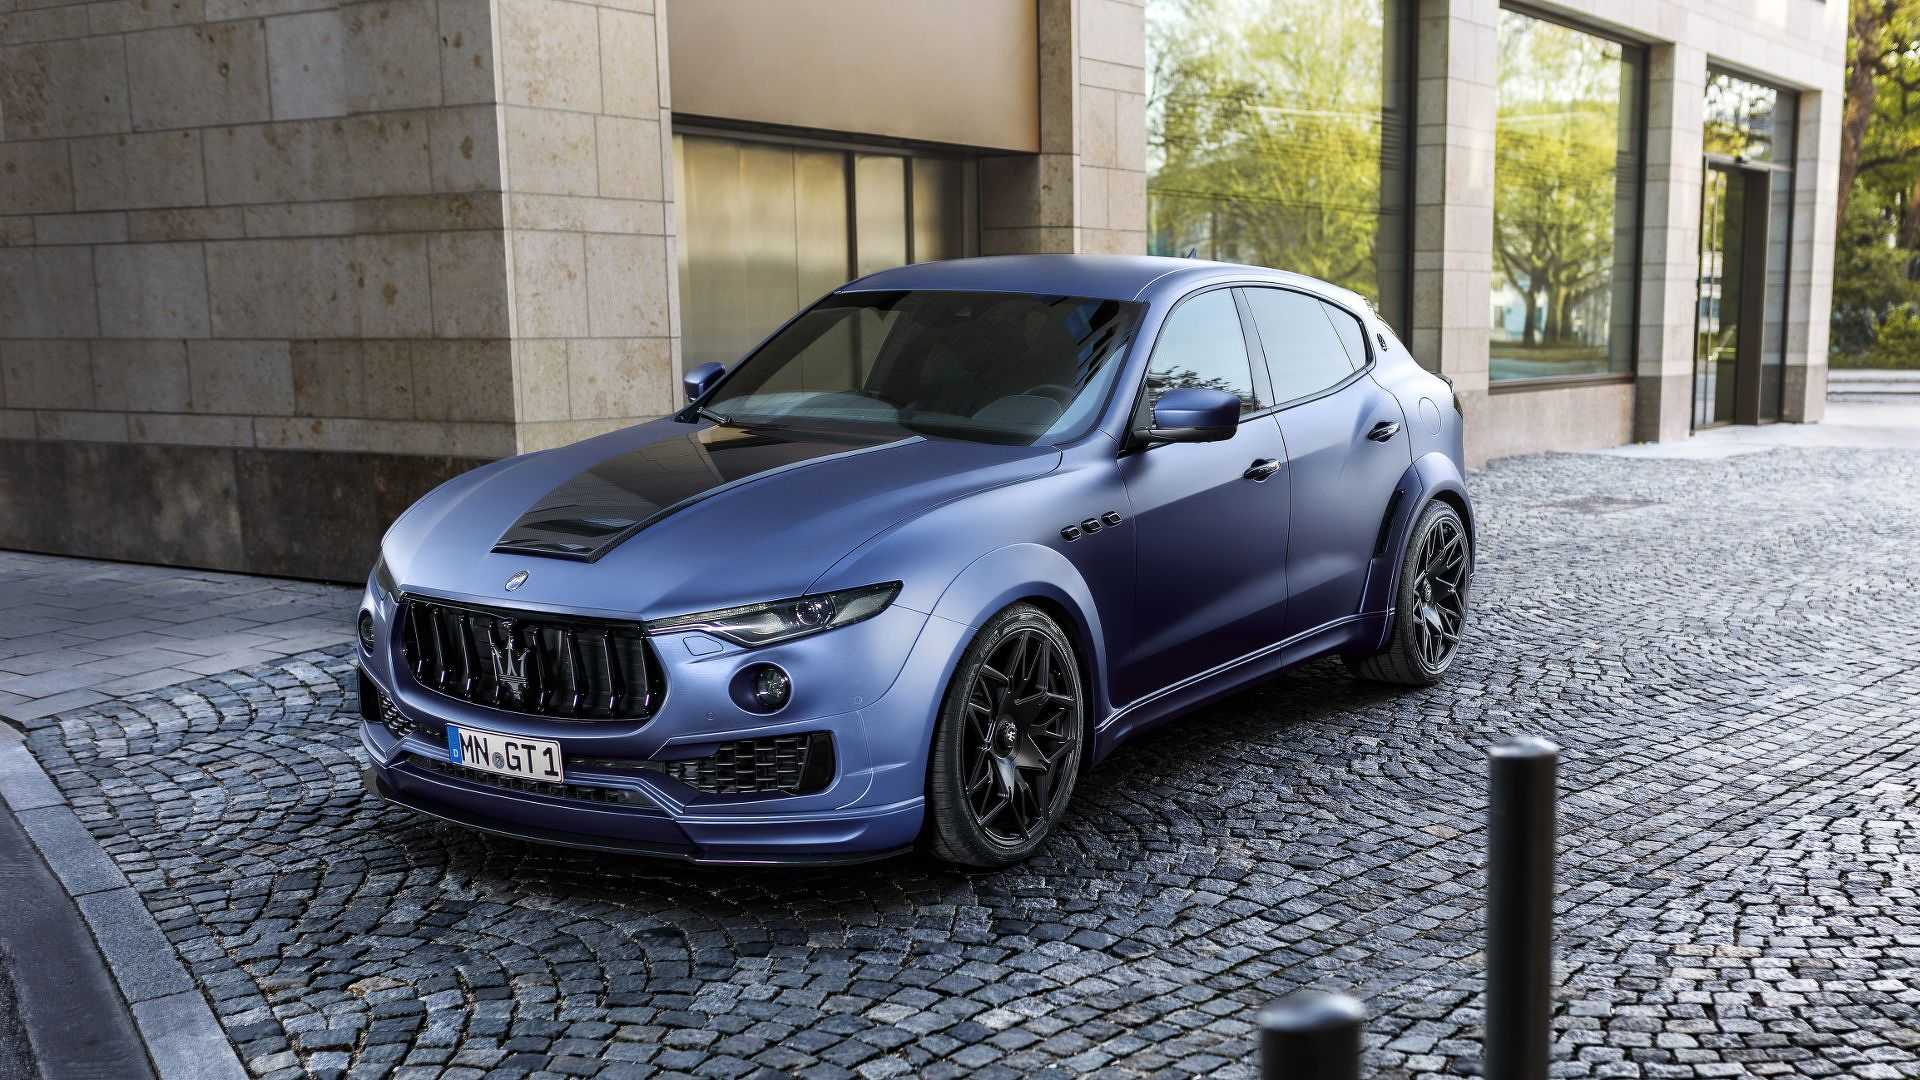 550hp Maserati Levante Gts To Be Launched In India By End Of